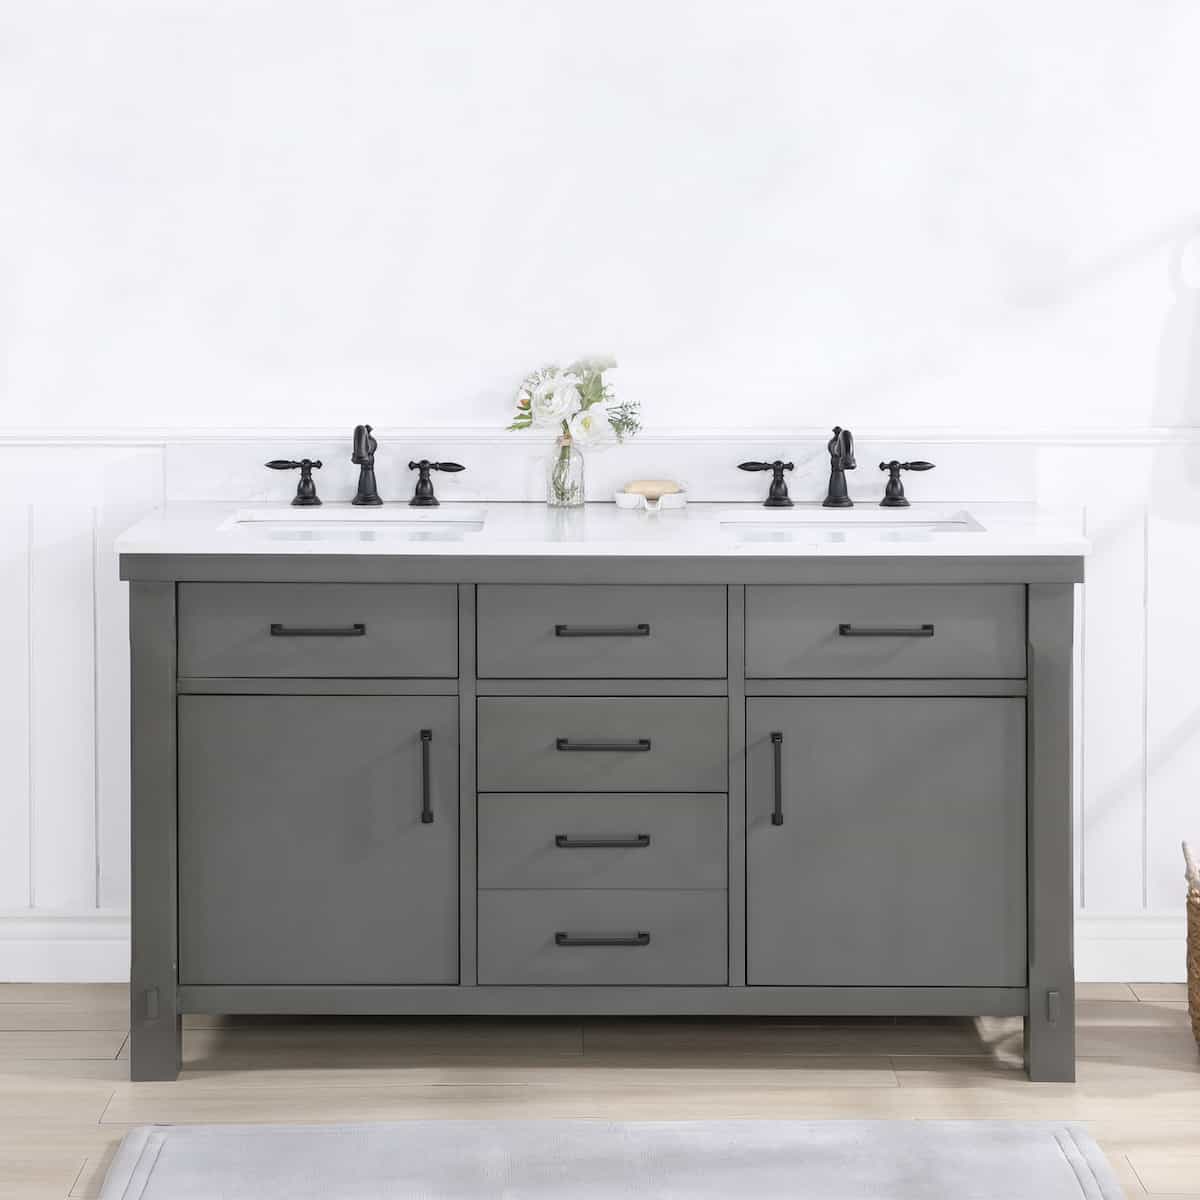 Vinnova Viella 60 Inch Double Sink Bath Vanity in Rust Grey Finish with White Composite Countertop Without Mirror in Bathroom 701860-RU-WS-NM